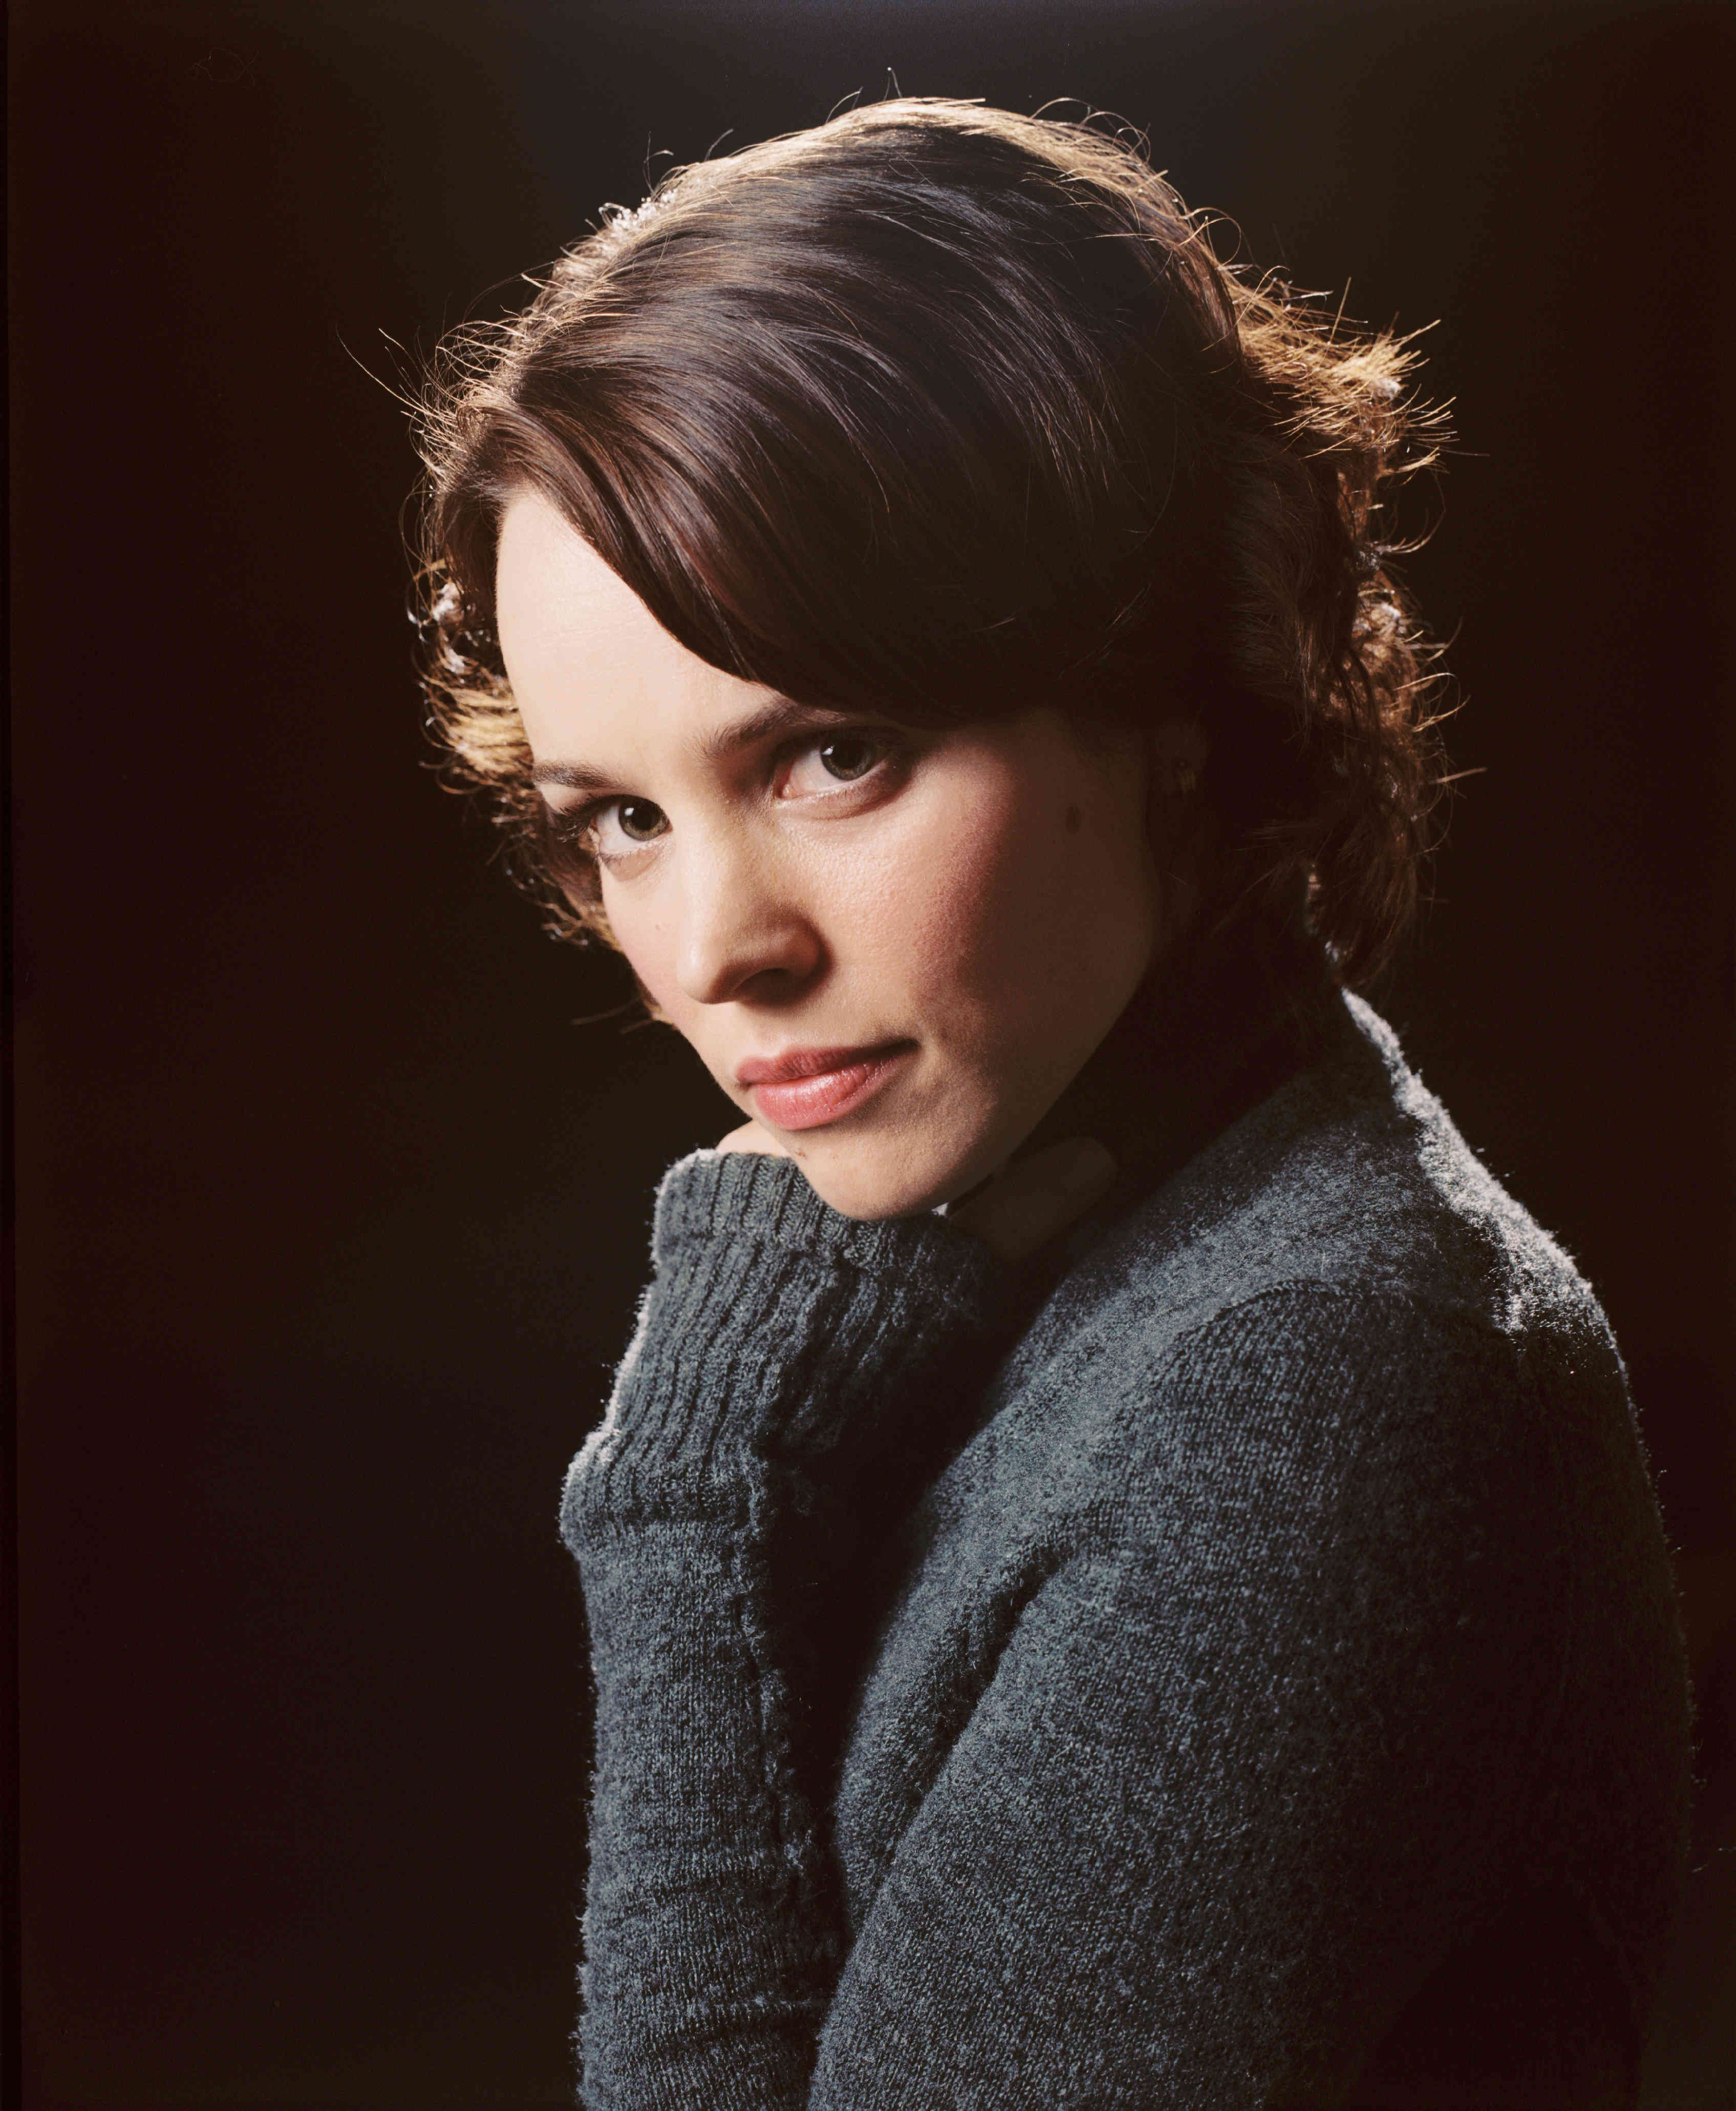 Rachel McAdams stars as Della Frye in Universal Pictures' State of Play (2009)